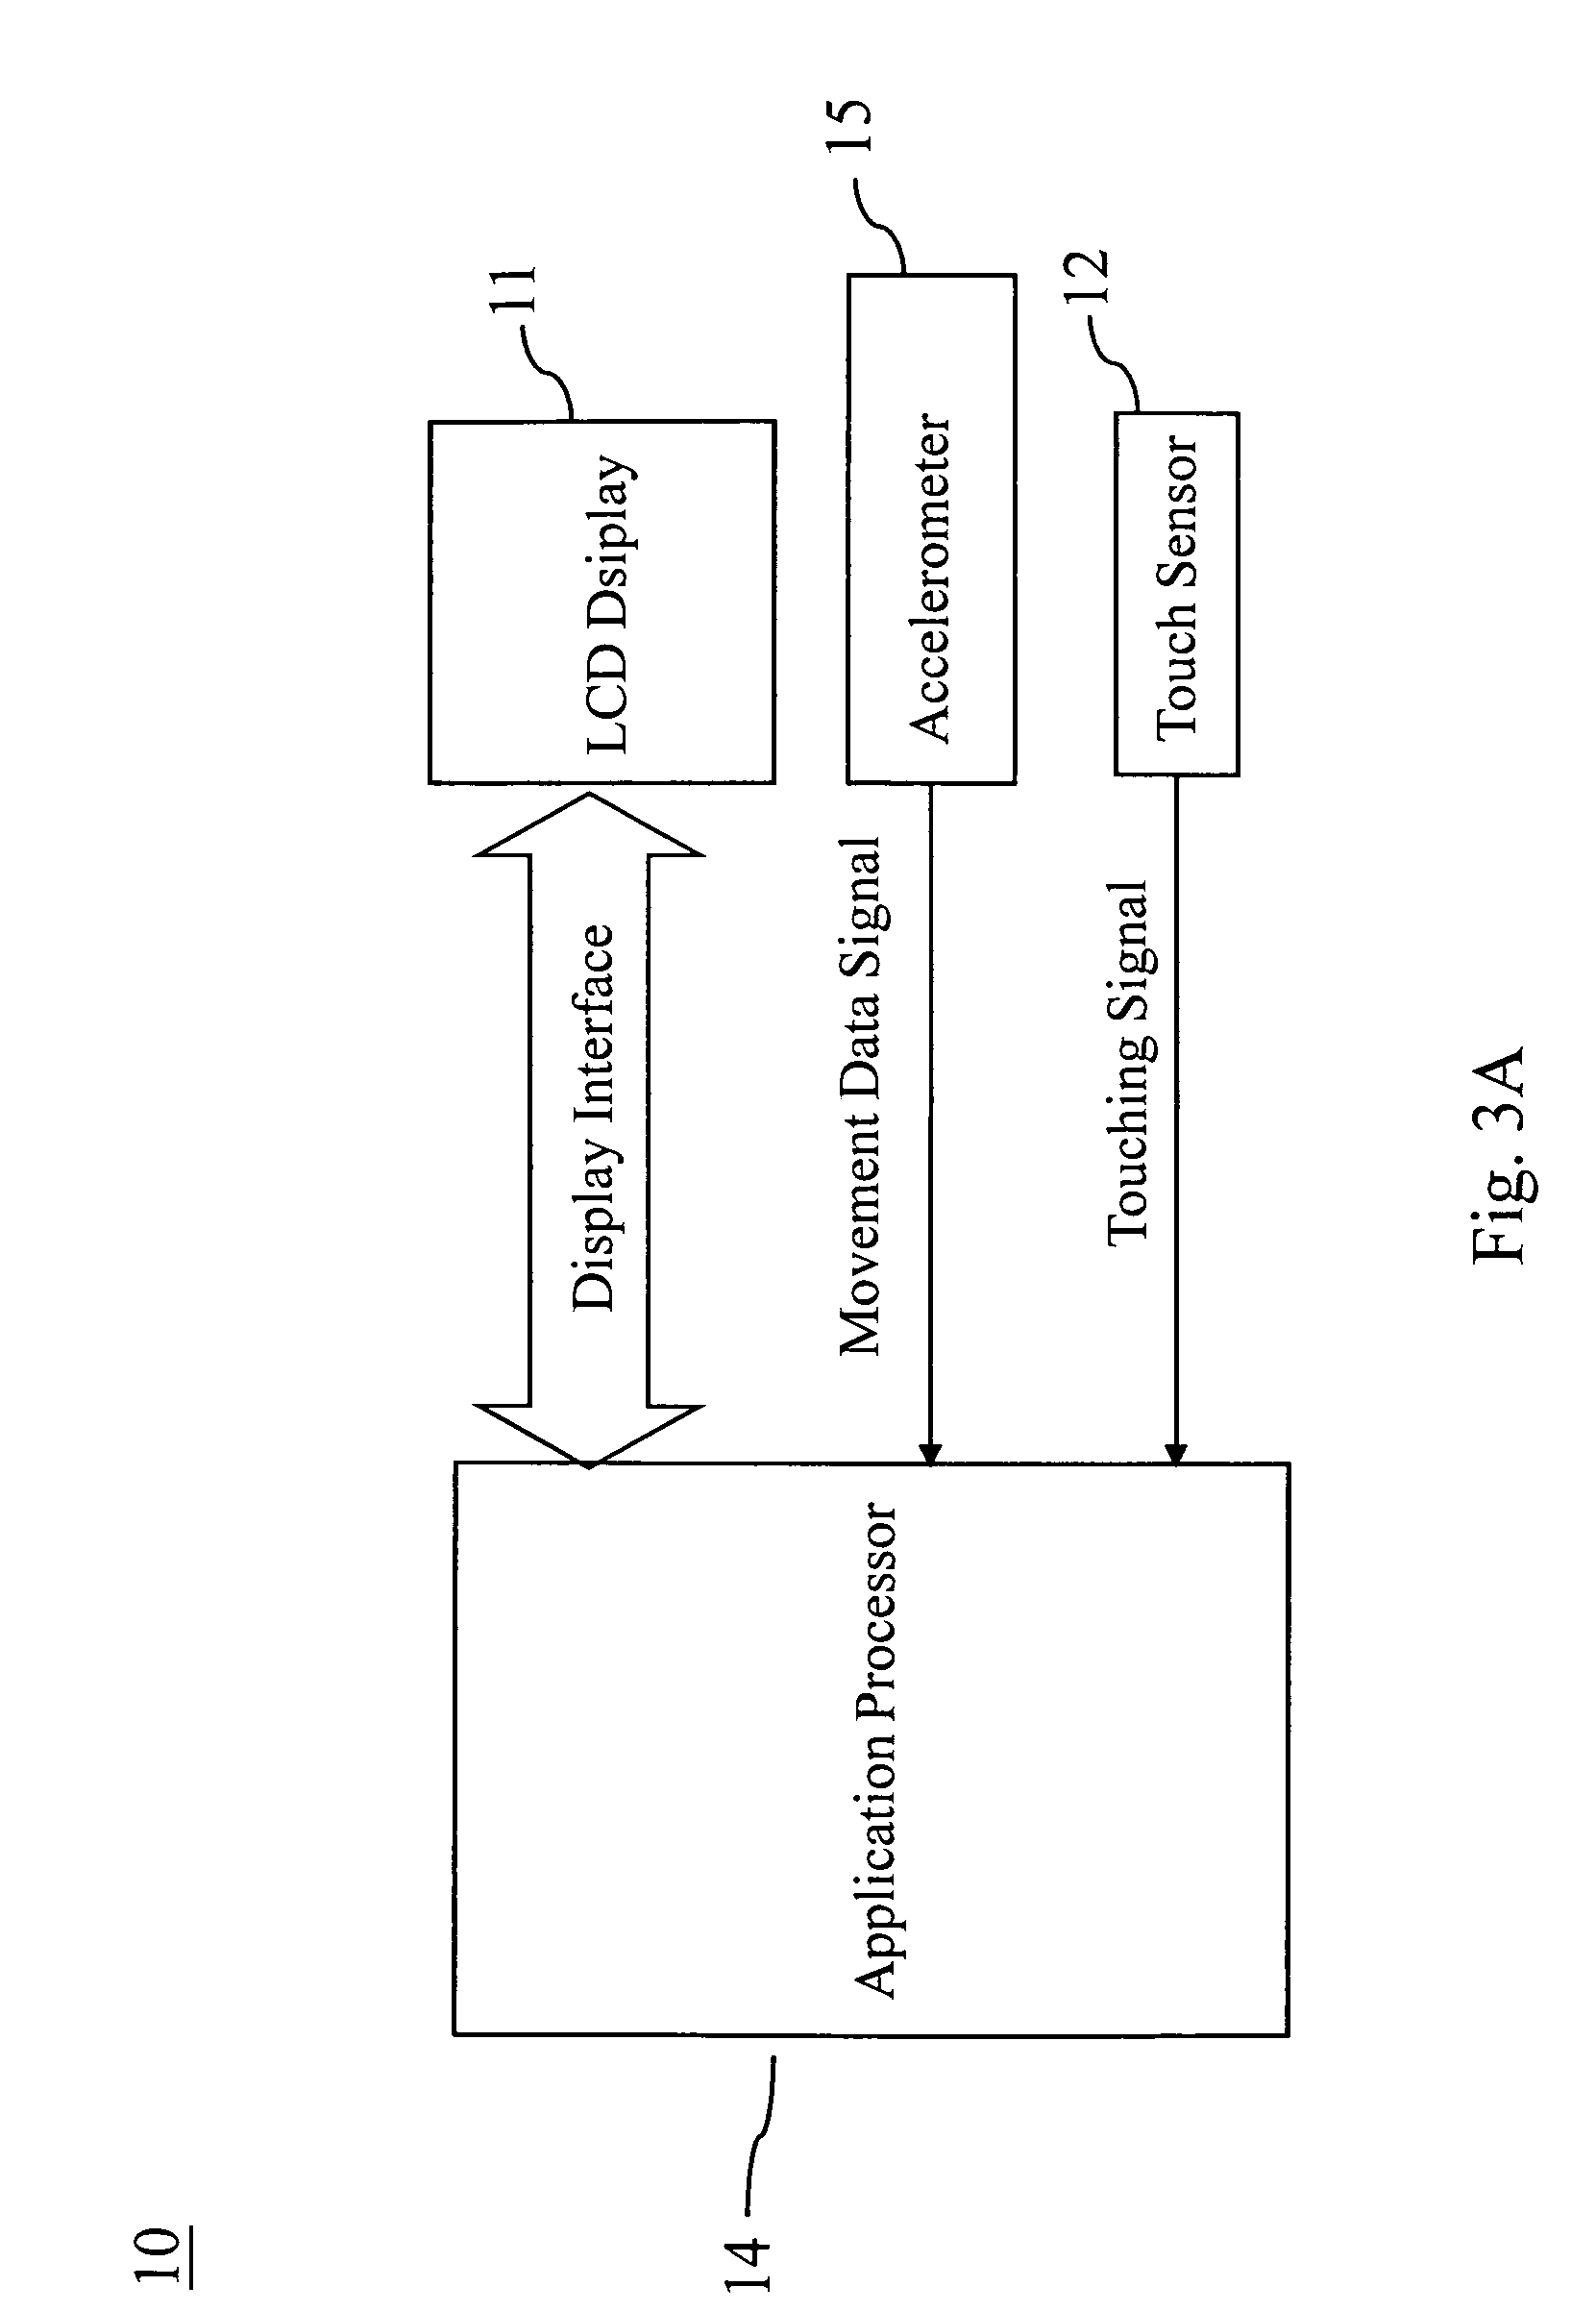 Portable electronis device and the mode switching method thereof